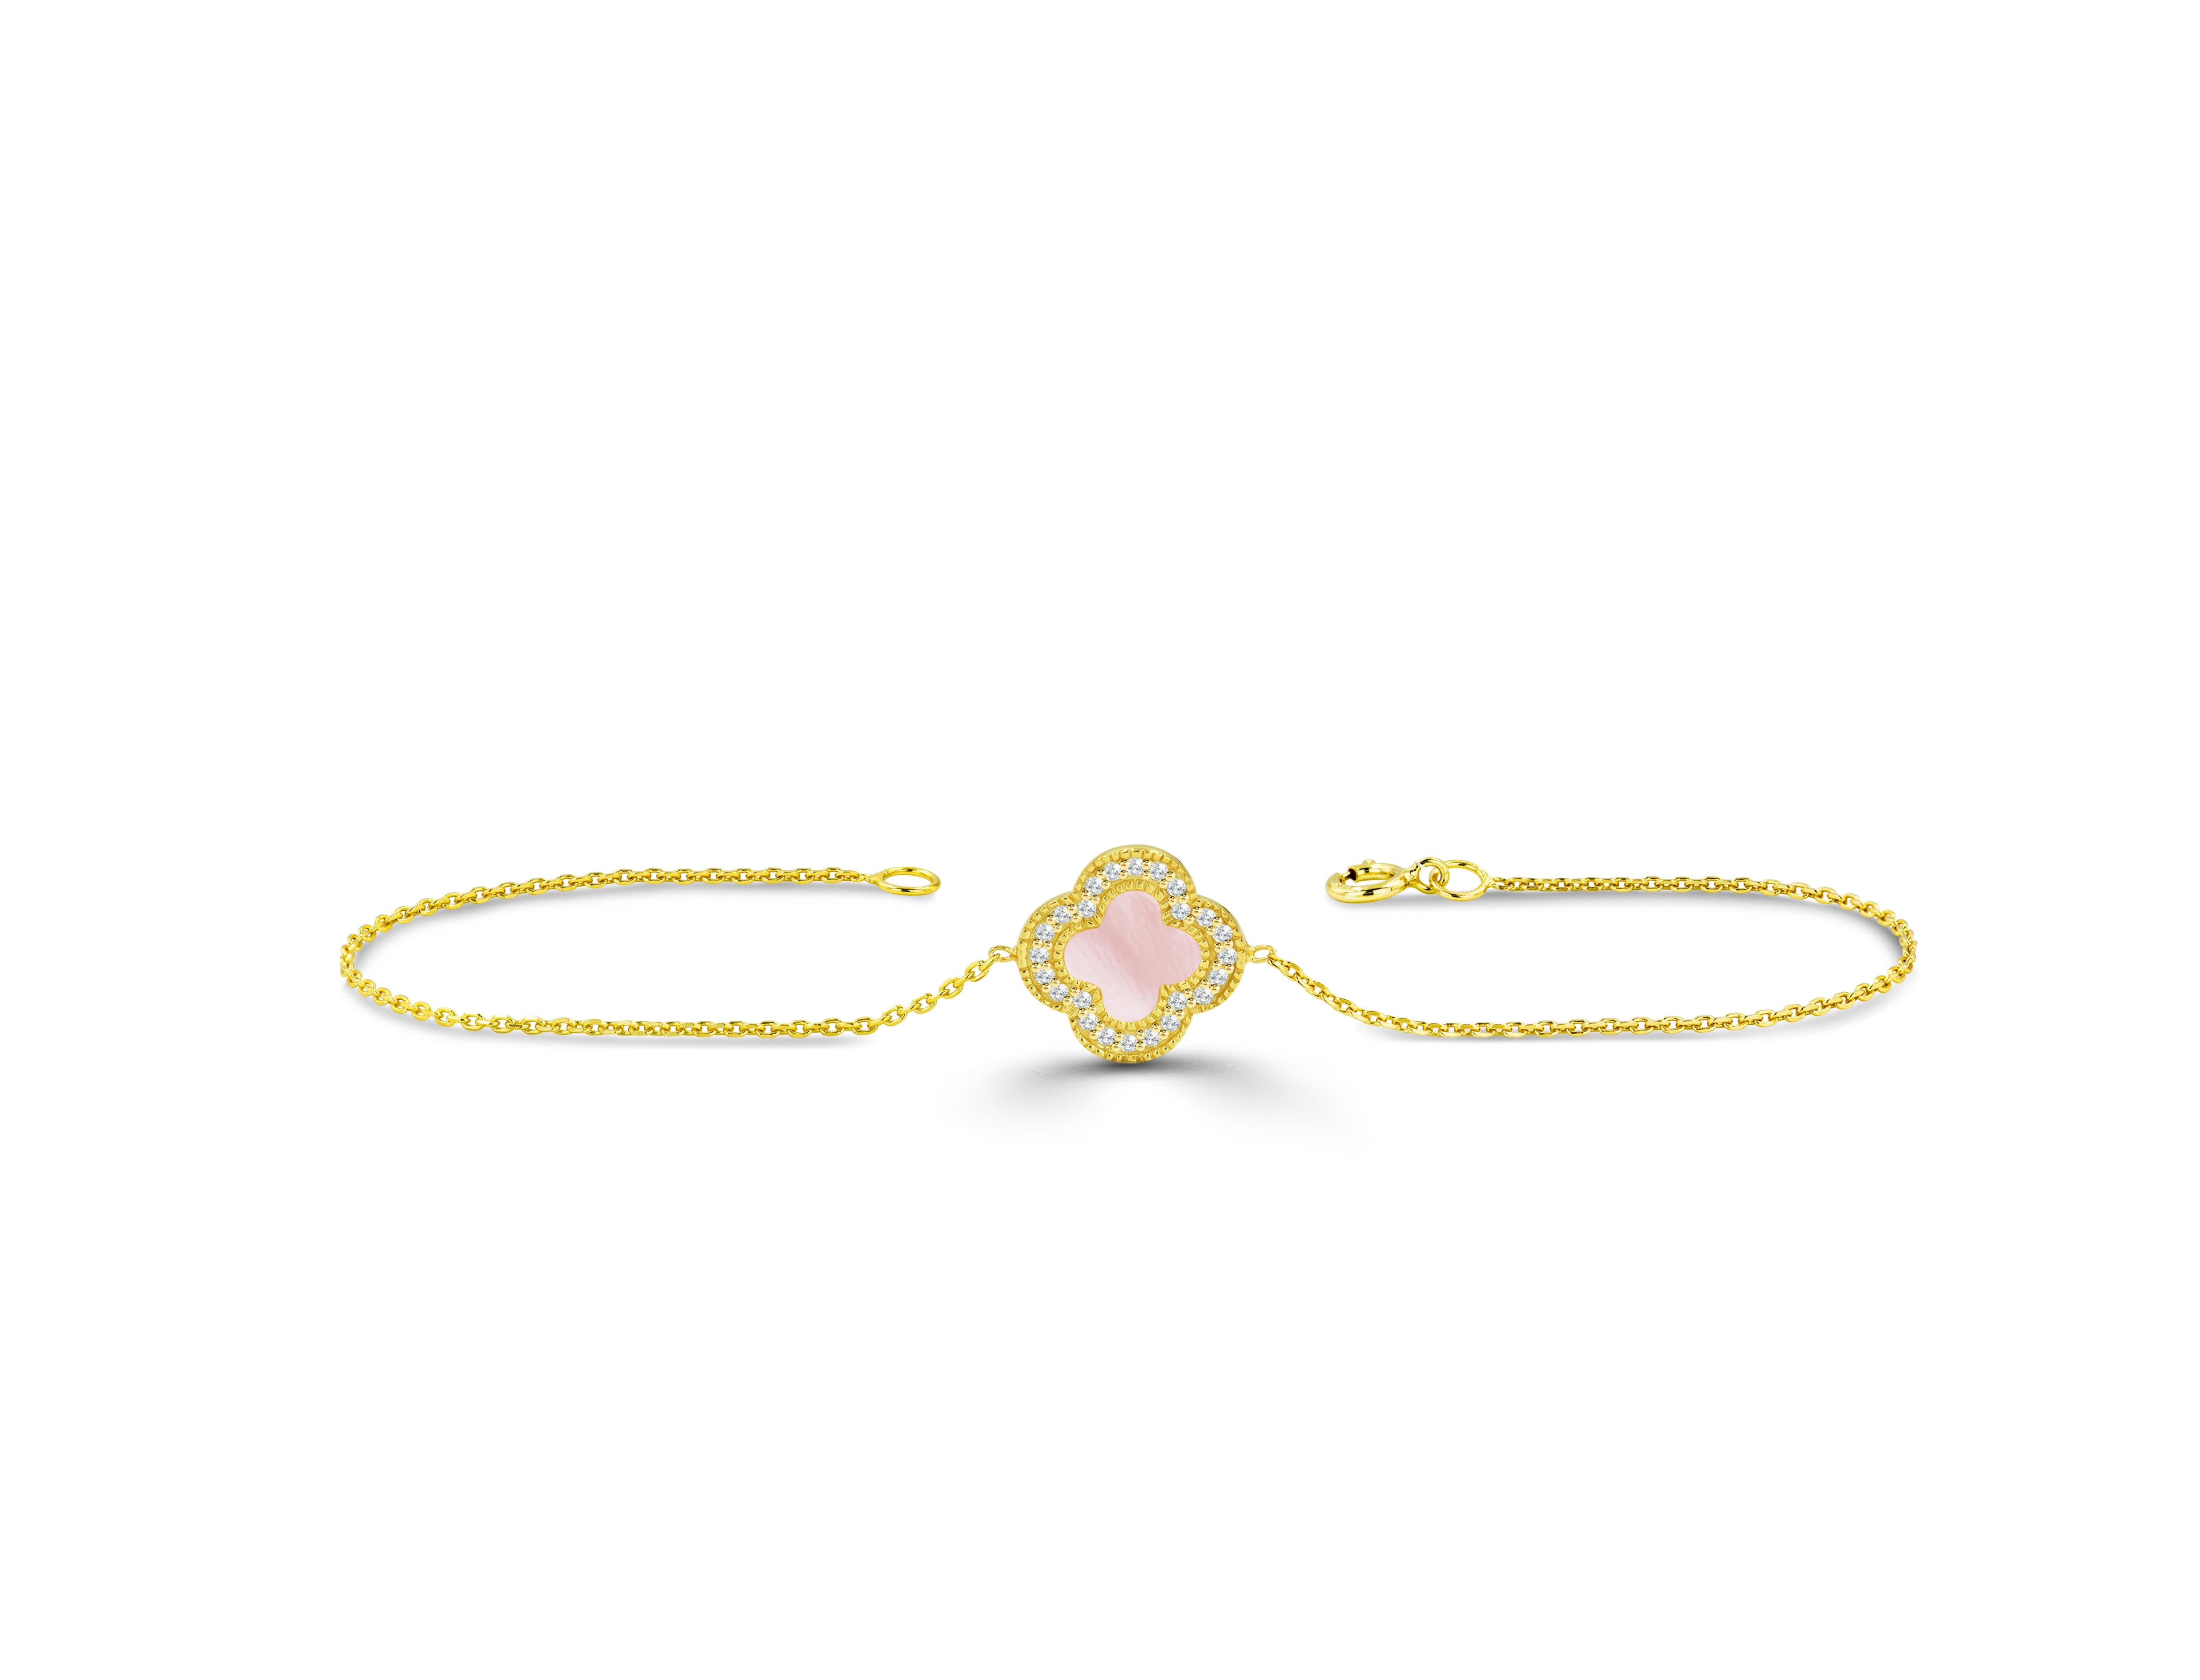 Gold Clover Mother of pearl Bracelet / abalone / Pink MOP / White MOP/ in 10K 14K and 18K Gold. Halo diamond bracelet. Jewelry for her

MOP Bracelet, Tahitian bracelet, Abalone bracelet, White MOP bracelet, Pink MOP Bracelet, Halo diamond bracelet ,